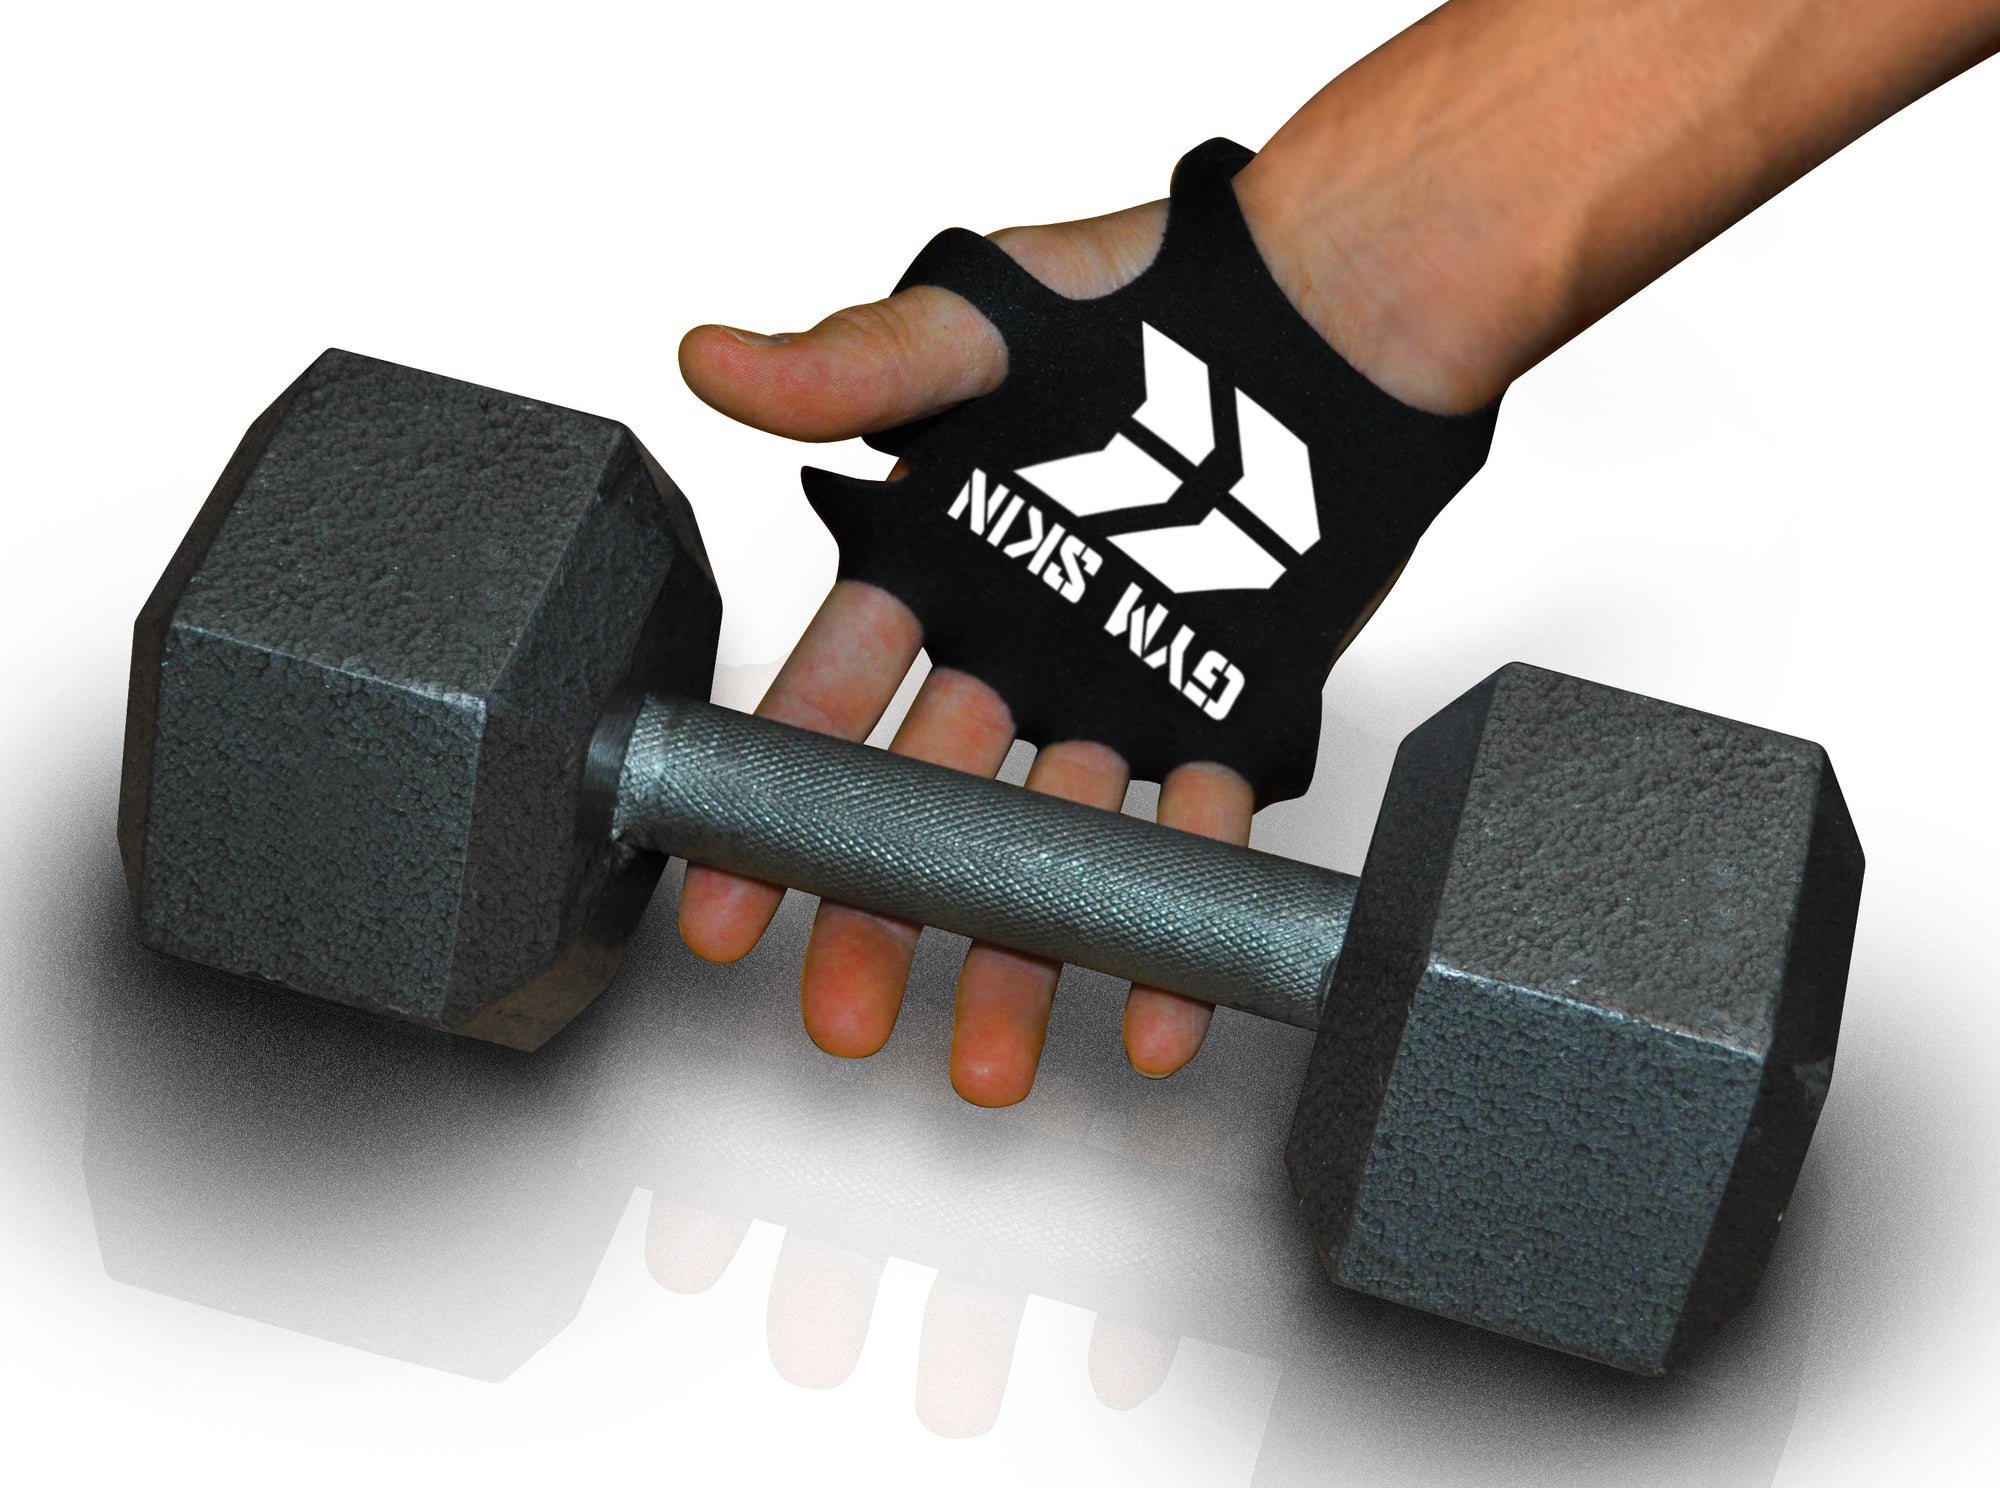 How to Get Rid of Calluses On Your Hands from Lifting Weights